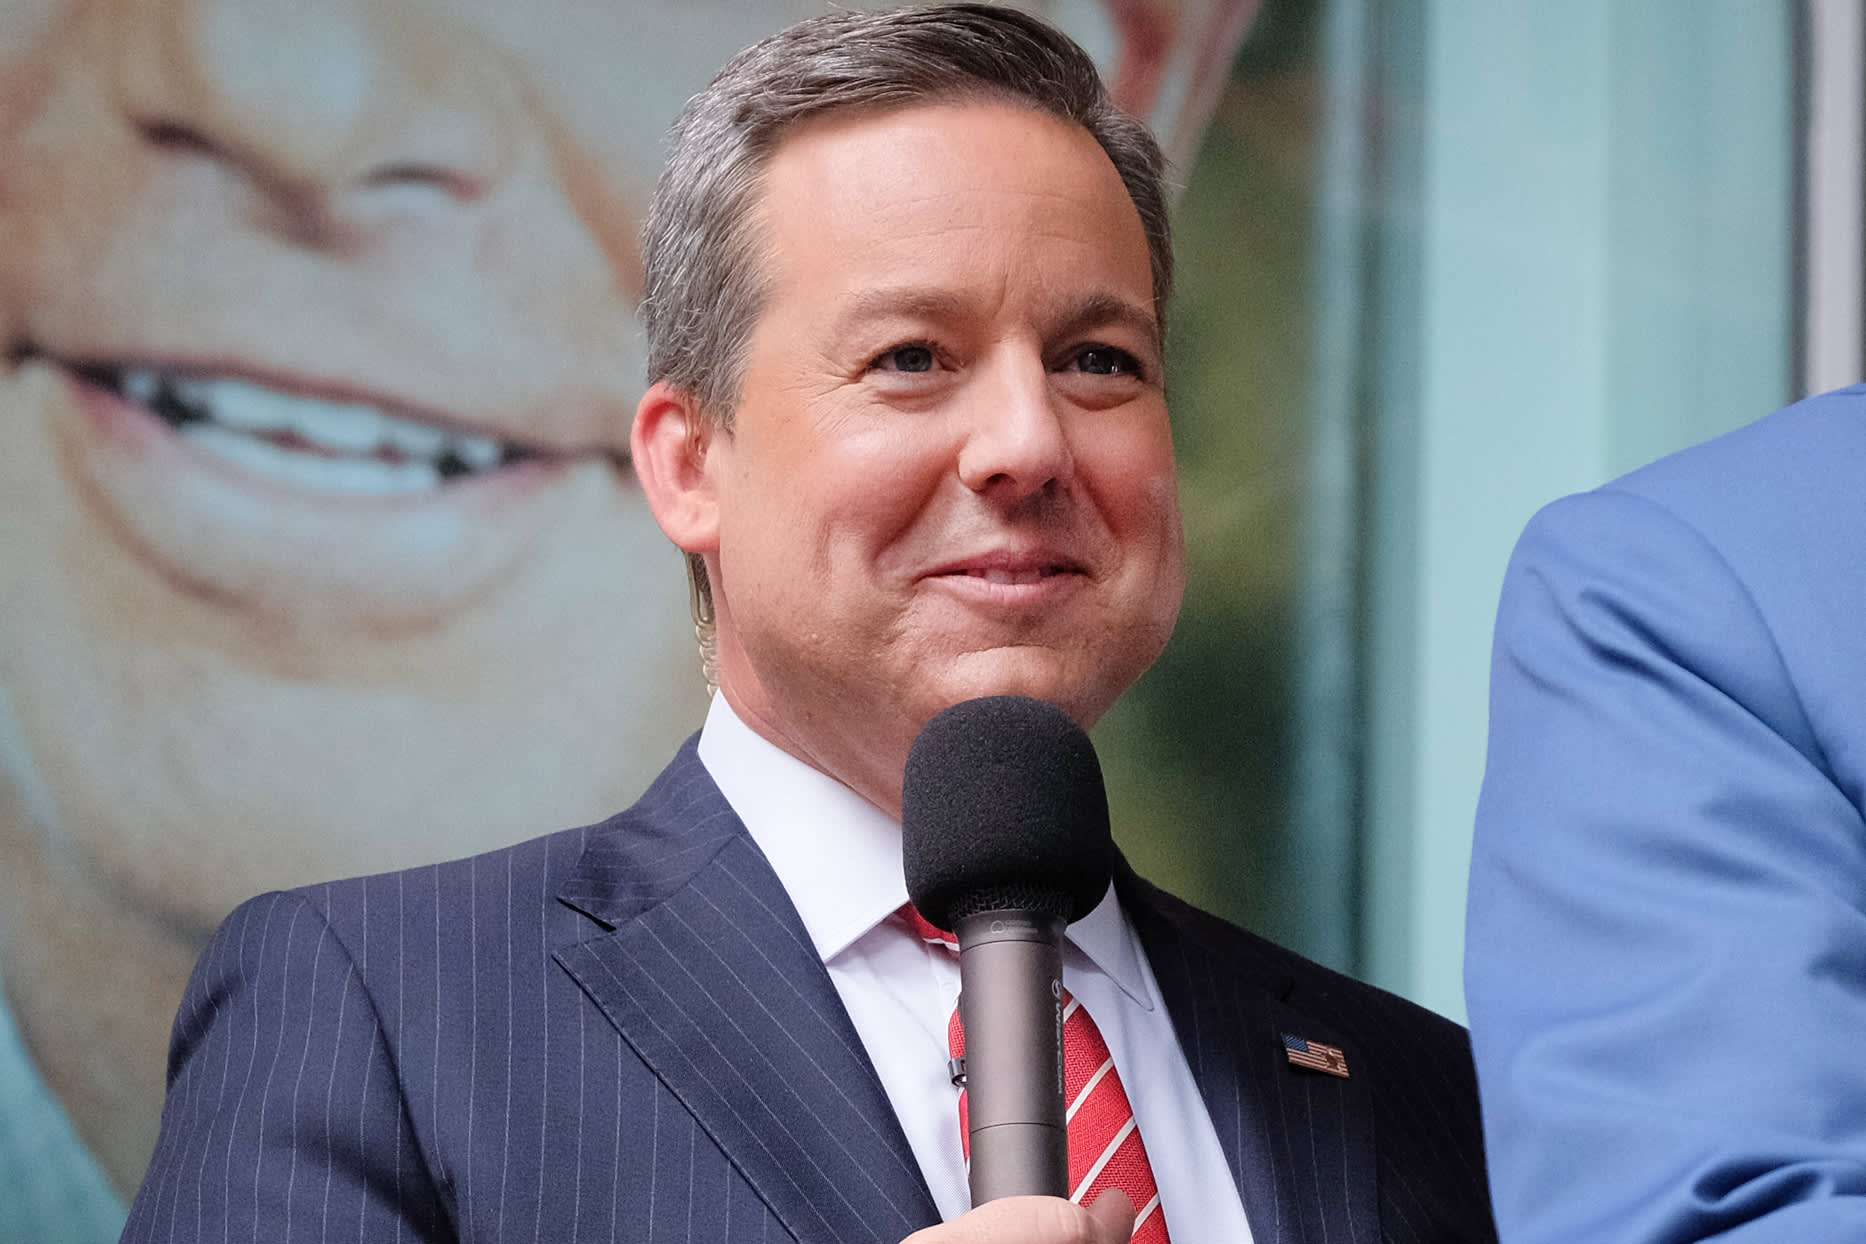 Fox News suit Ed Henry accused of rape, Sean Hannity and Tucker Carlson accused of harassment